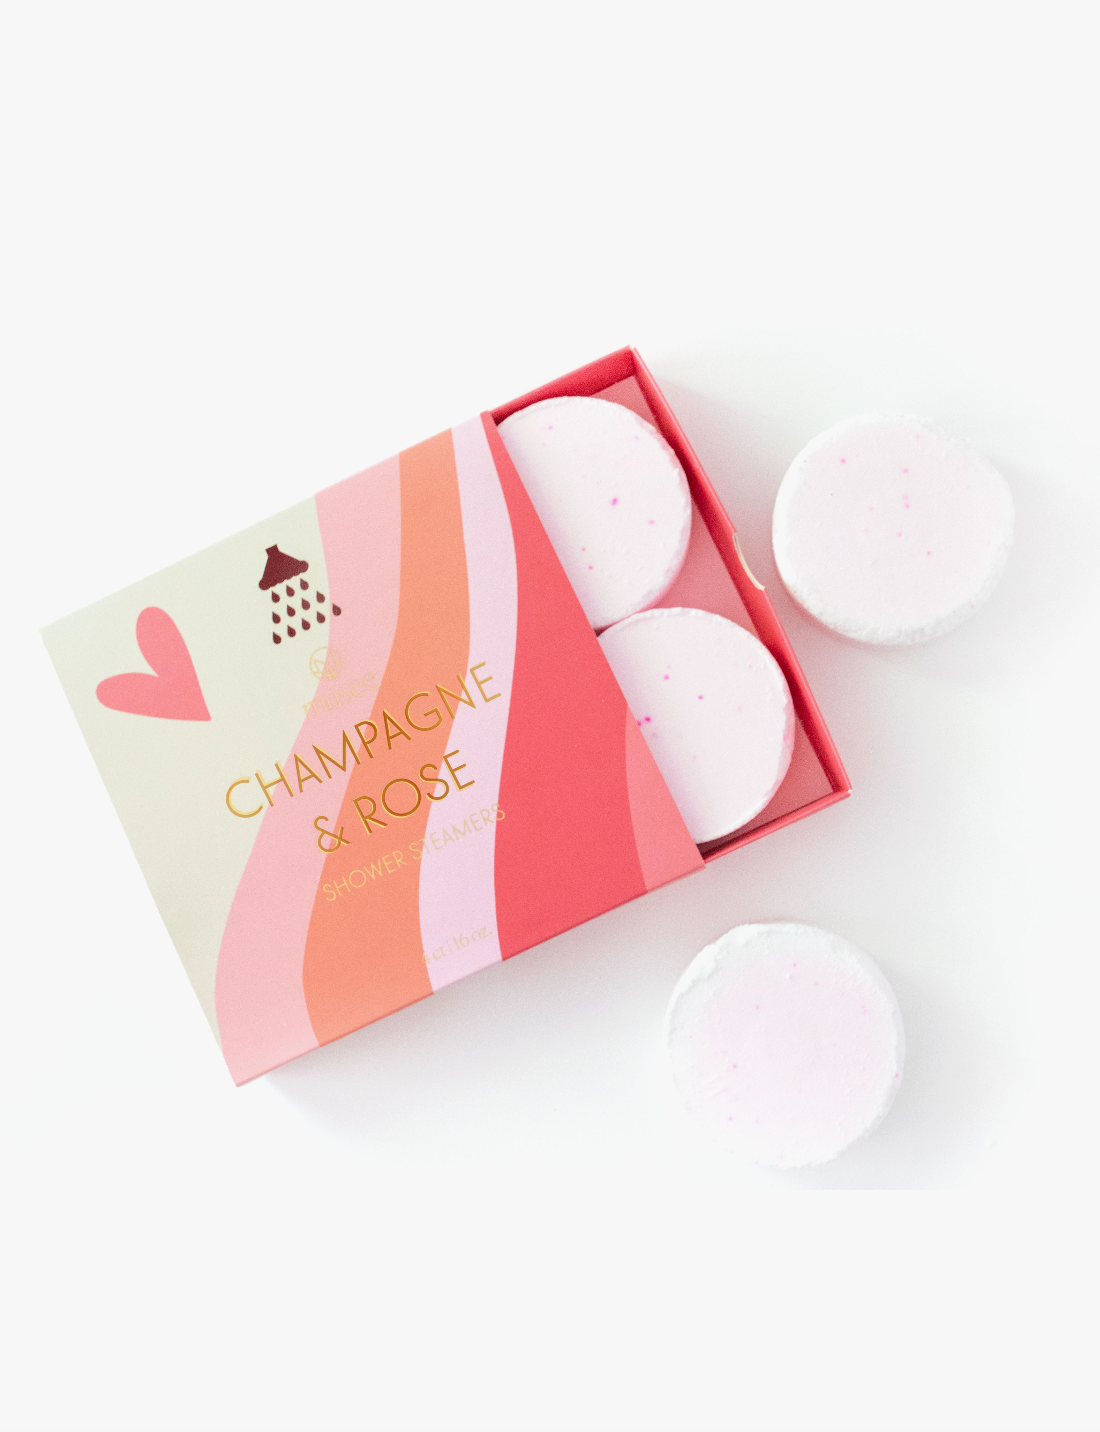 Champagne & Rose Shower Steamers - Glow